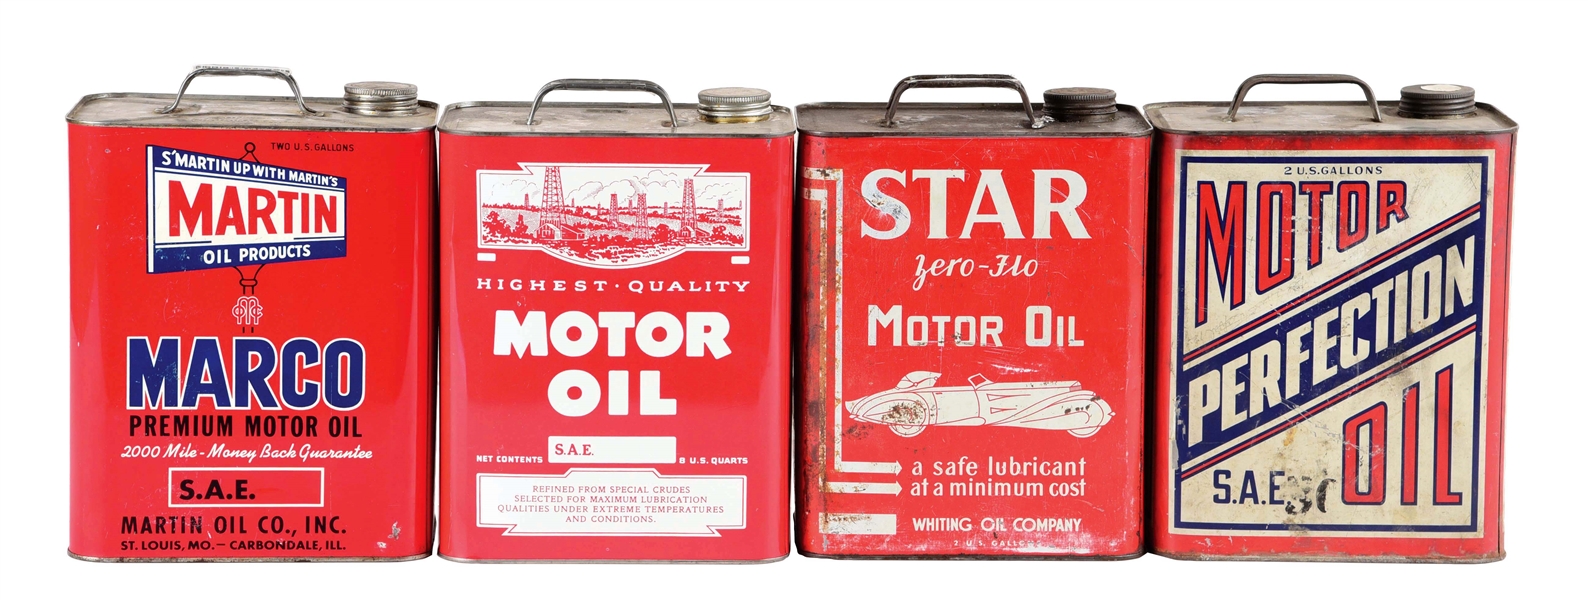 LOT OF 4: TWO GALLON OIL CANS FROM LUBROIL, PERFECTION, MARTIN & STAR MOTOR OILS. 